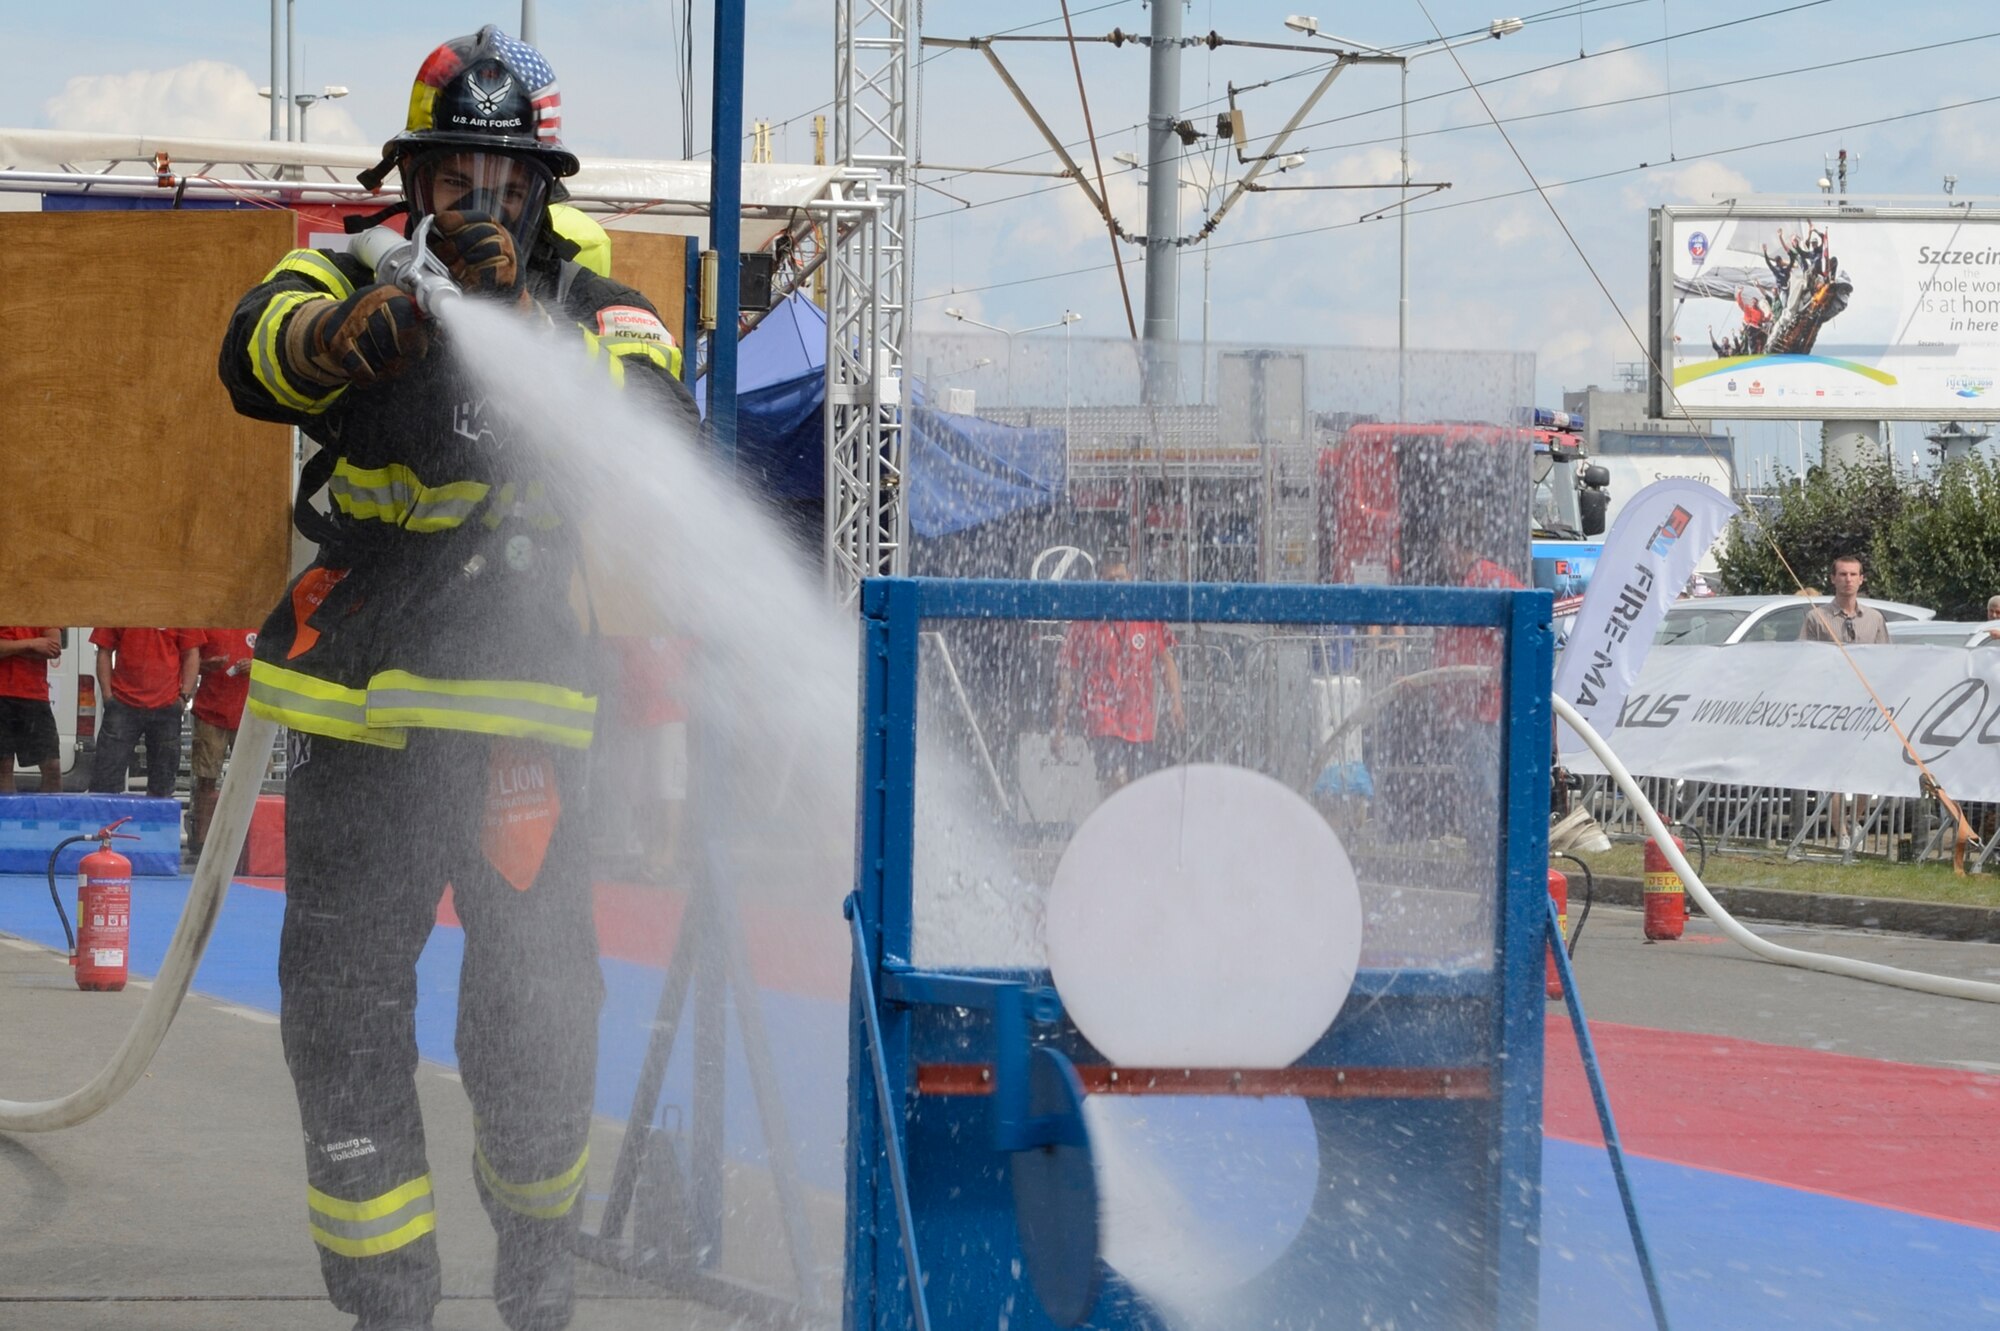 SPANGDAHLEM AIR BASE, Germany – U.S. Air Force Staff Sgt. Benjamin Gonsales, 52nd Civil Engineer Squadron firefighter from Savannah, Ga., sprays water to extinguish a simulated fire at the Szczecin Firefighter Combat Challenge in Szczecin, Poland Aug. 10, 2013. Gonsales carried the hose a distance of 78 feet, turning on the hose to extinguish the fire after crossing a simulated door to a building. (U.S. Air Force photo by Staff Sgt. Christopher Ruano/Released)